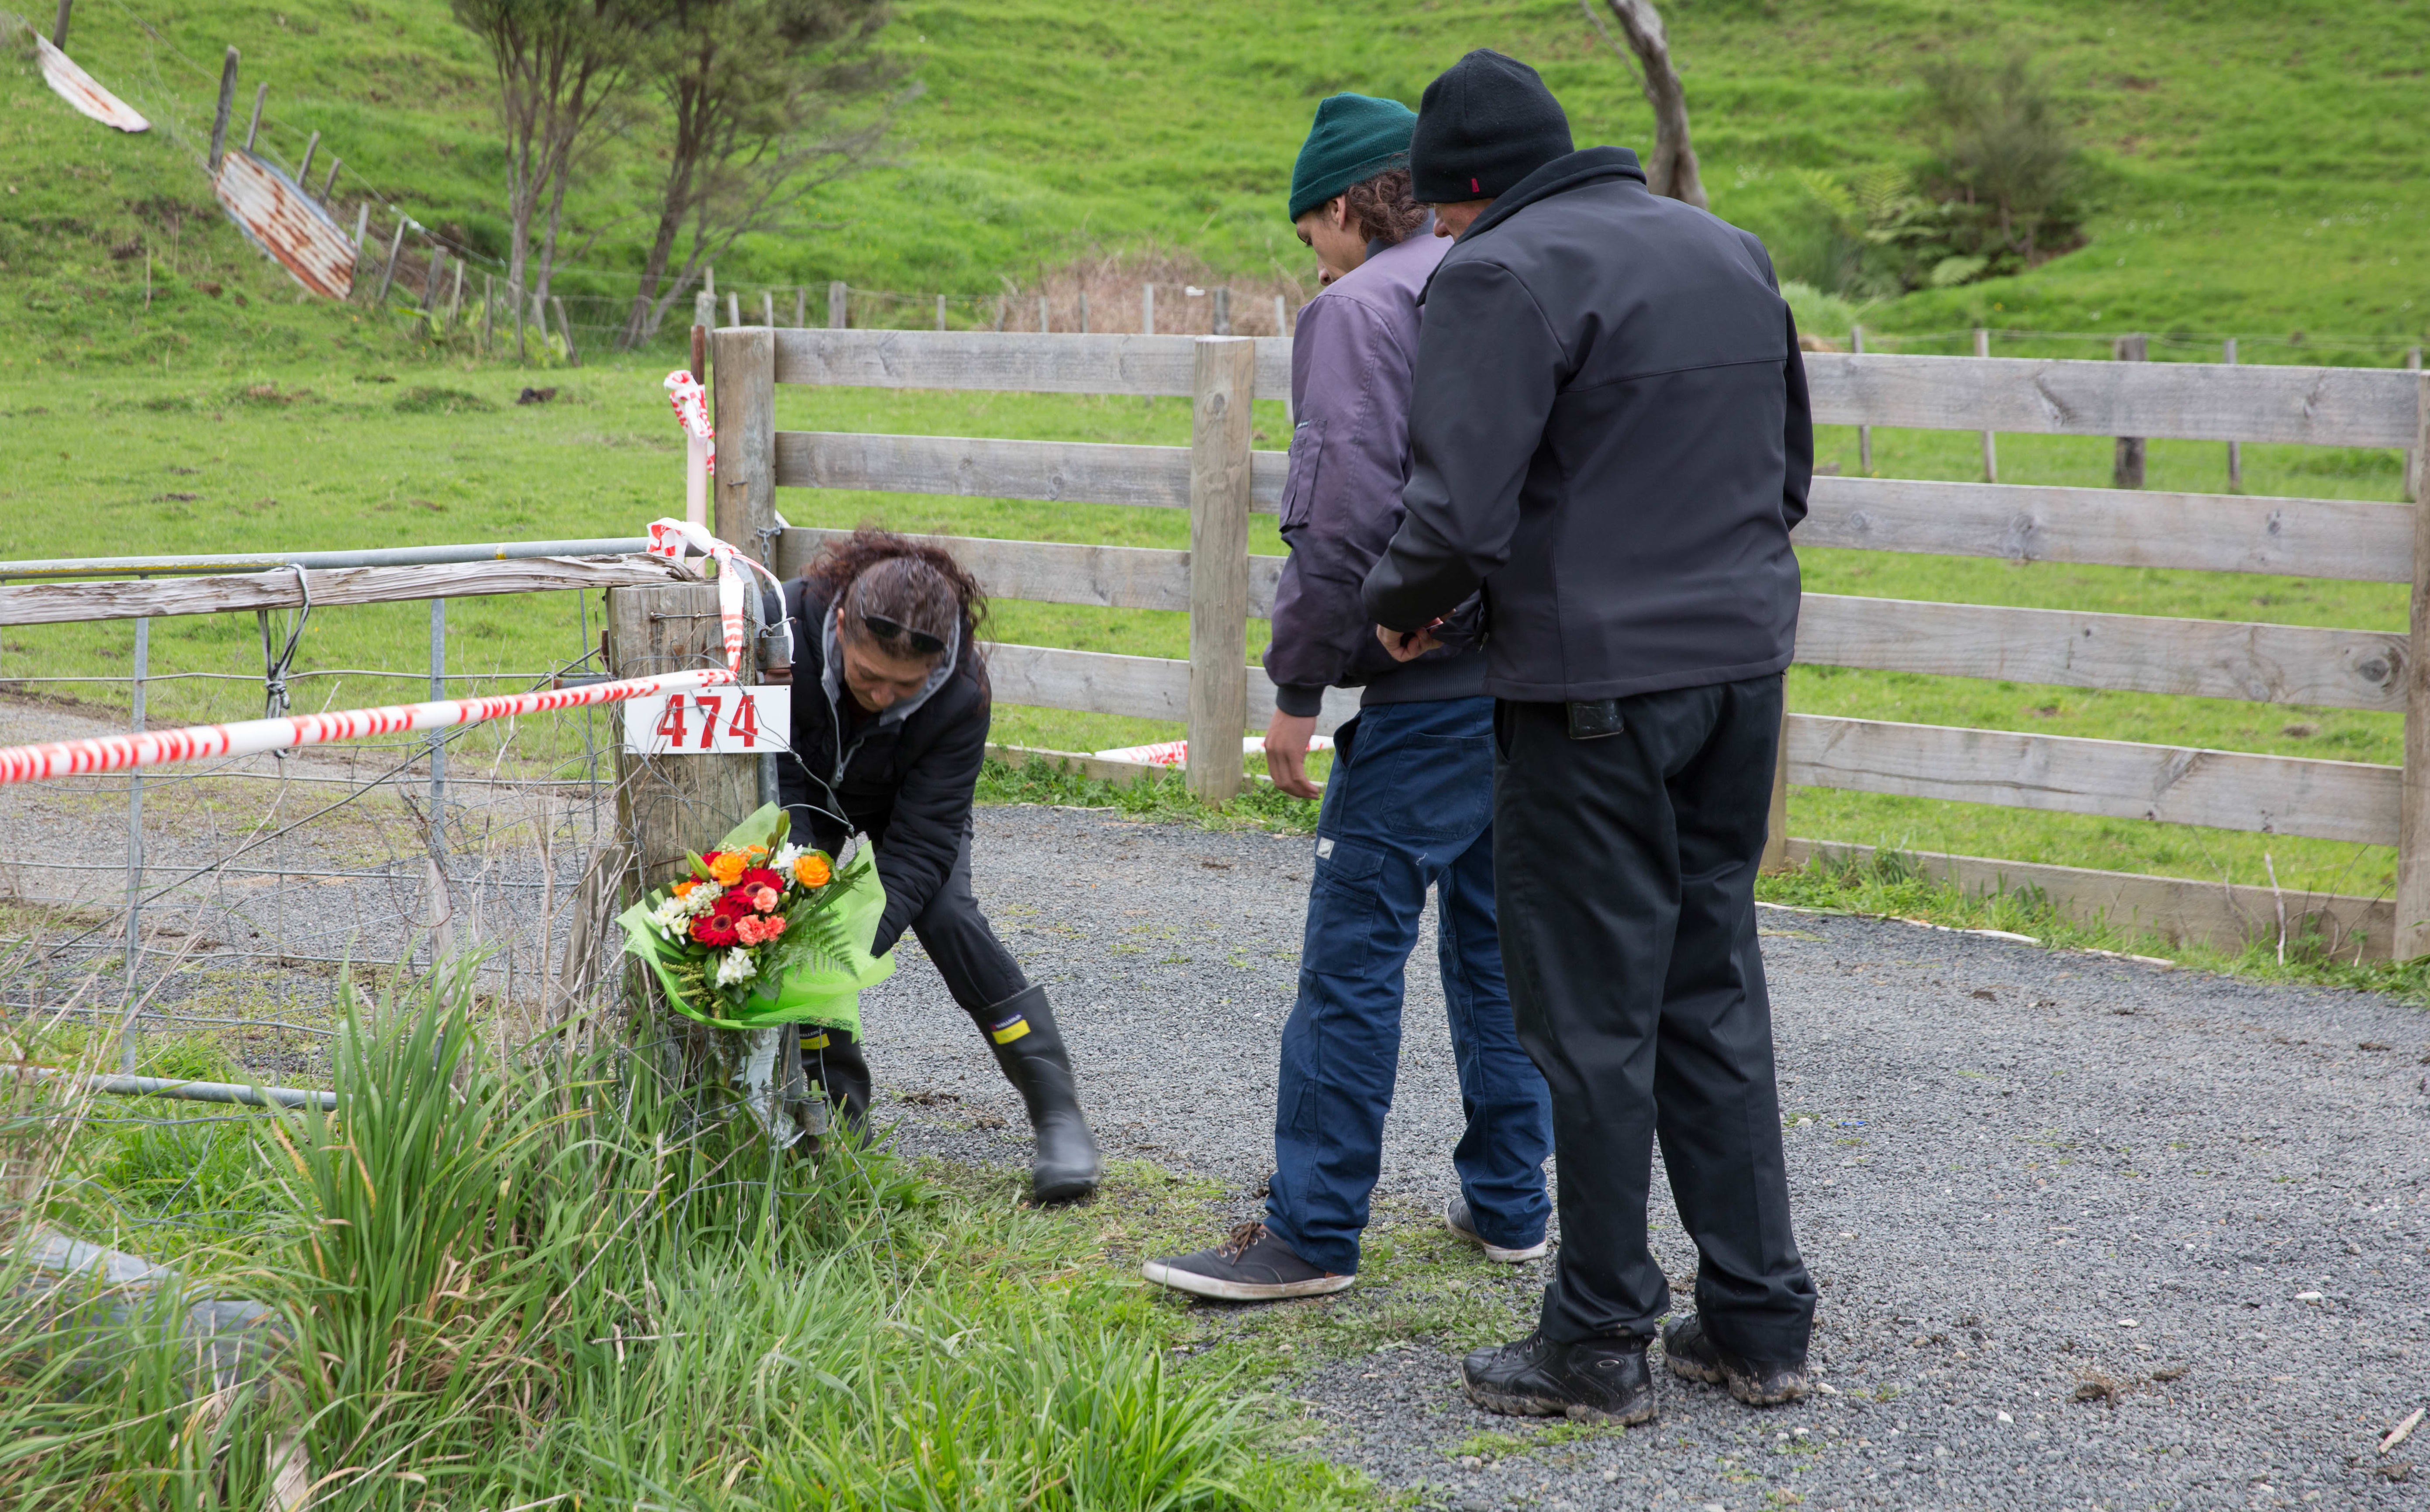 People place flowers at the entrance to the Kinohaku property where three bodies were found, including that of Ross Bremner.